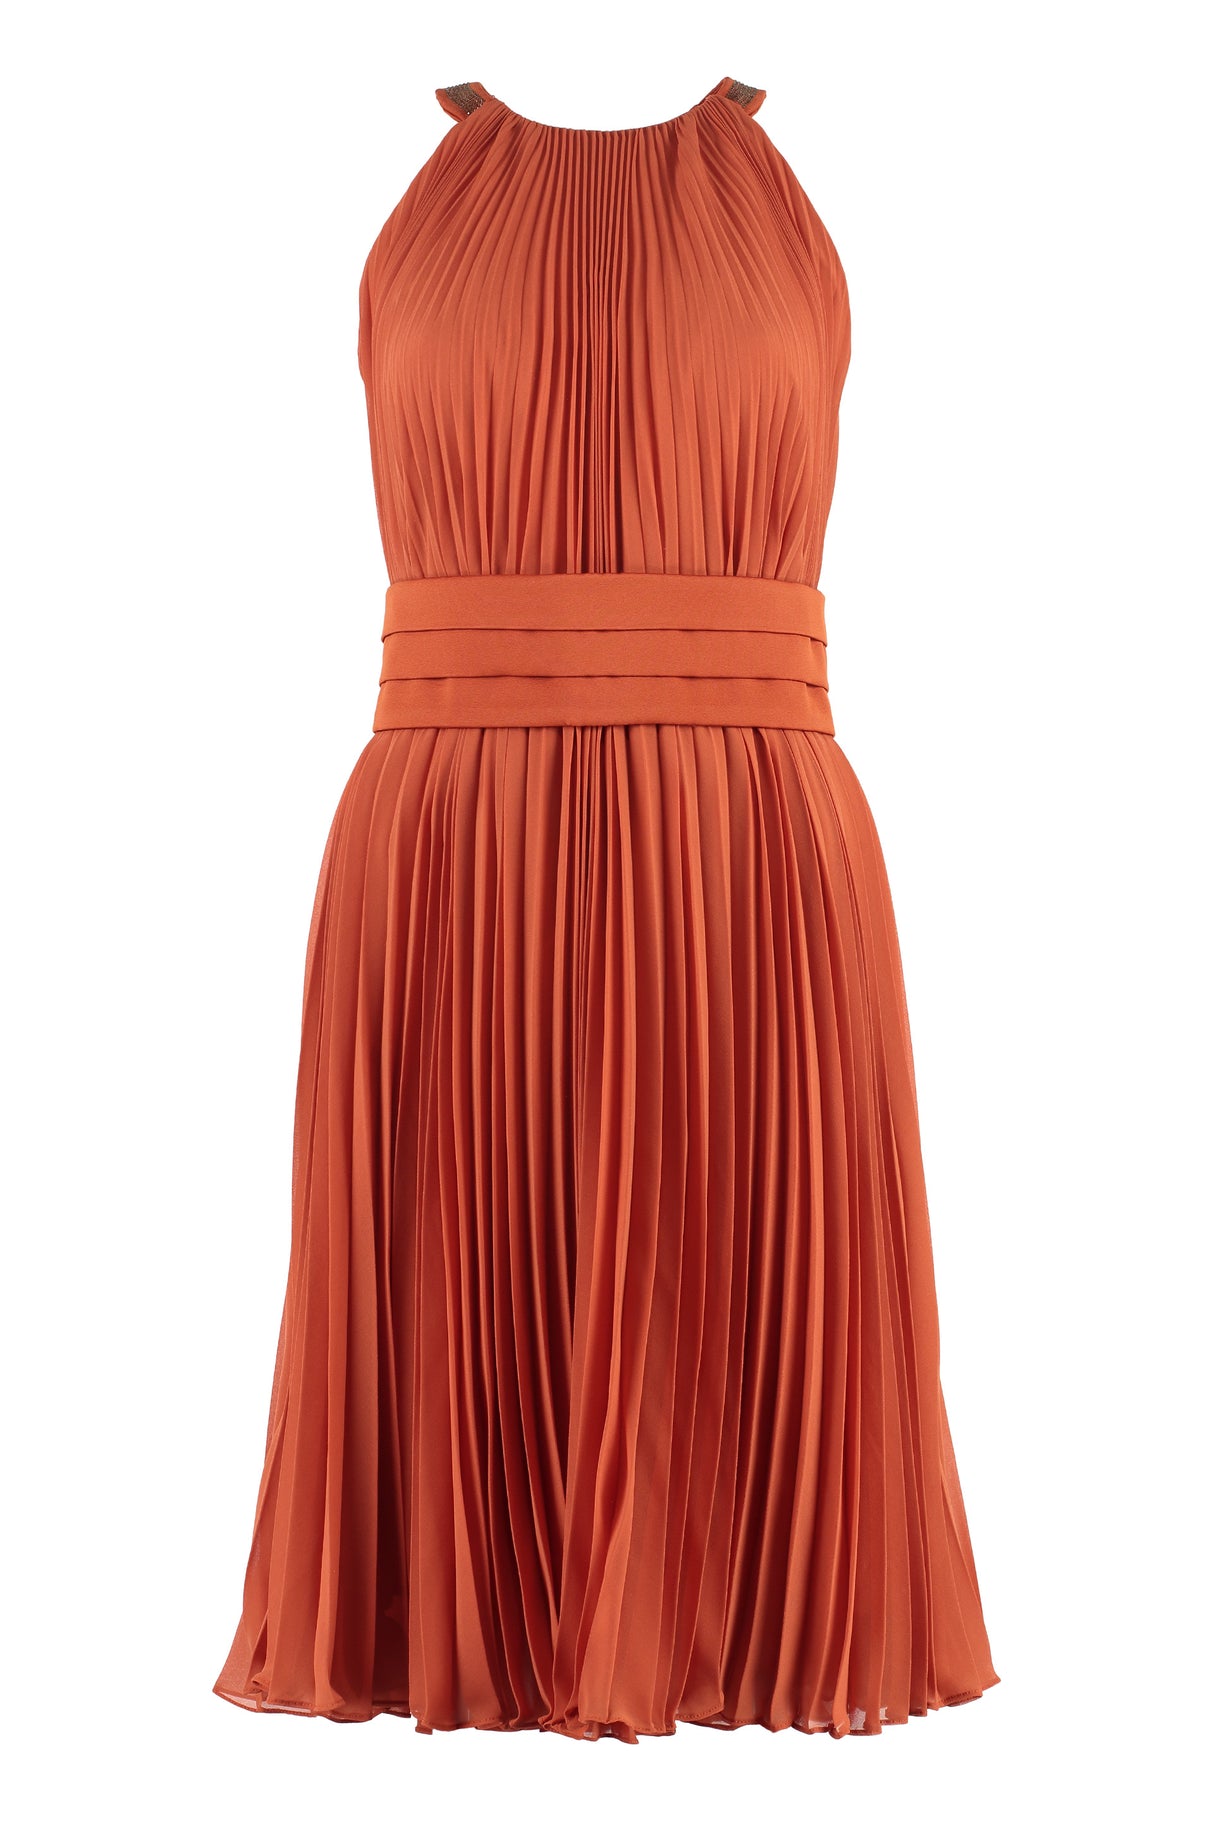 MAX MARA Multicolor Burnt Pleated Dress with Embroidered Neckline and Coordinated Belt, SS23 Collection for Women